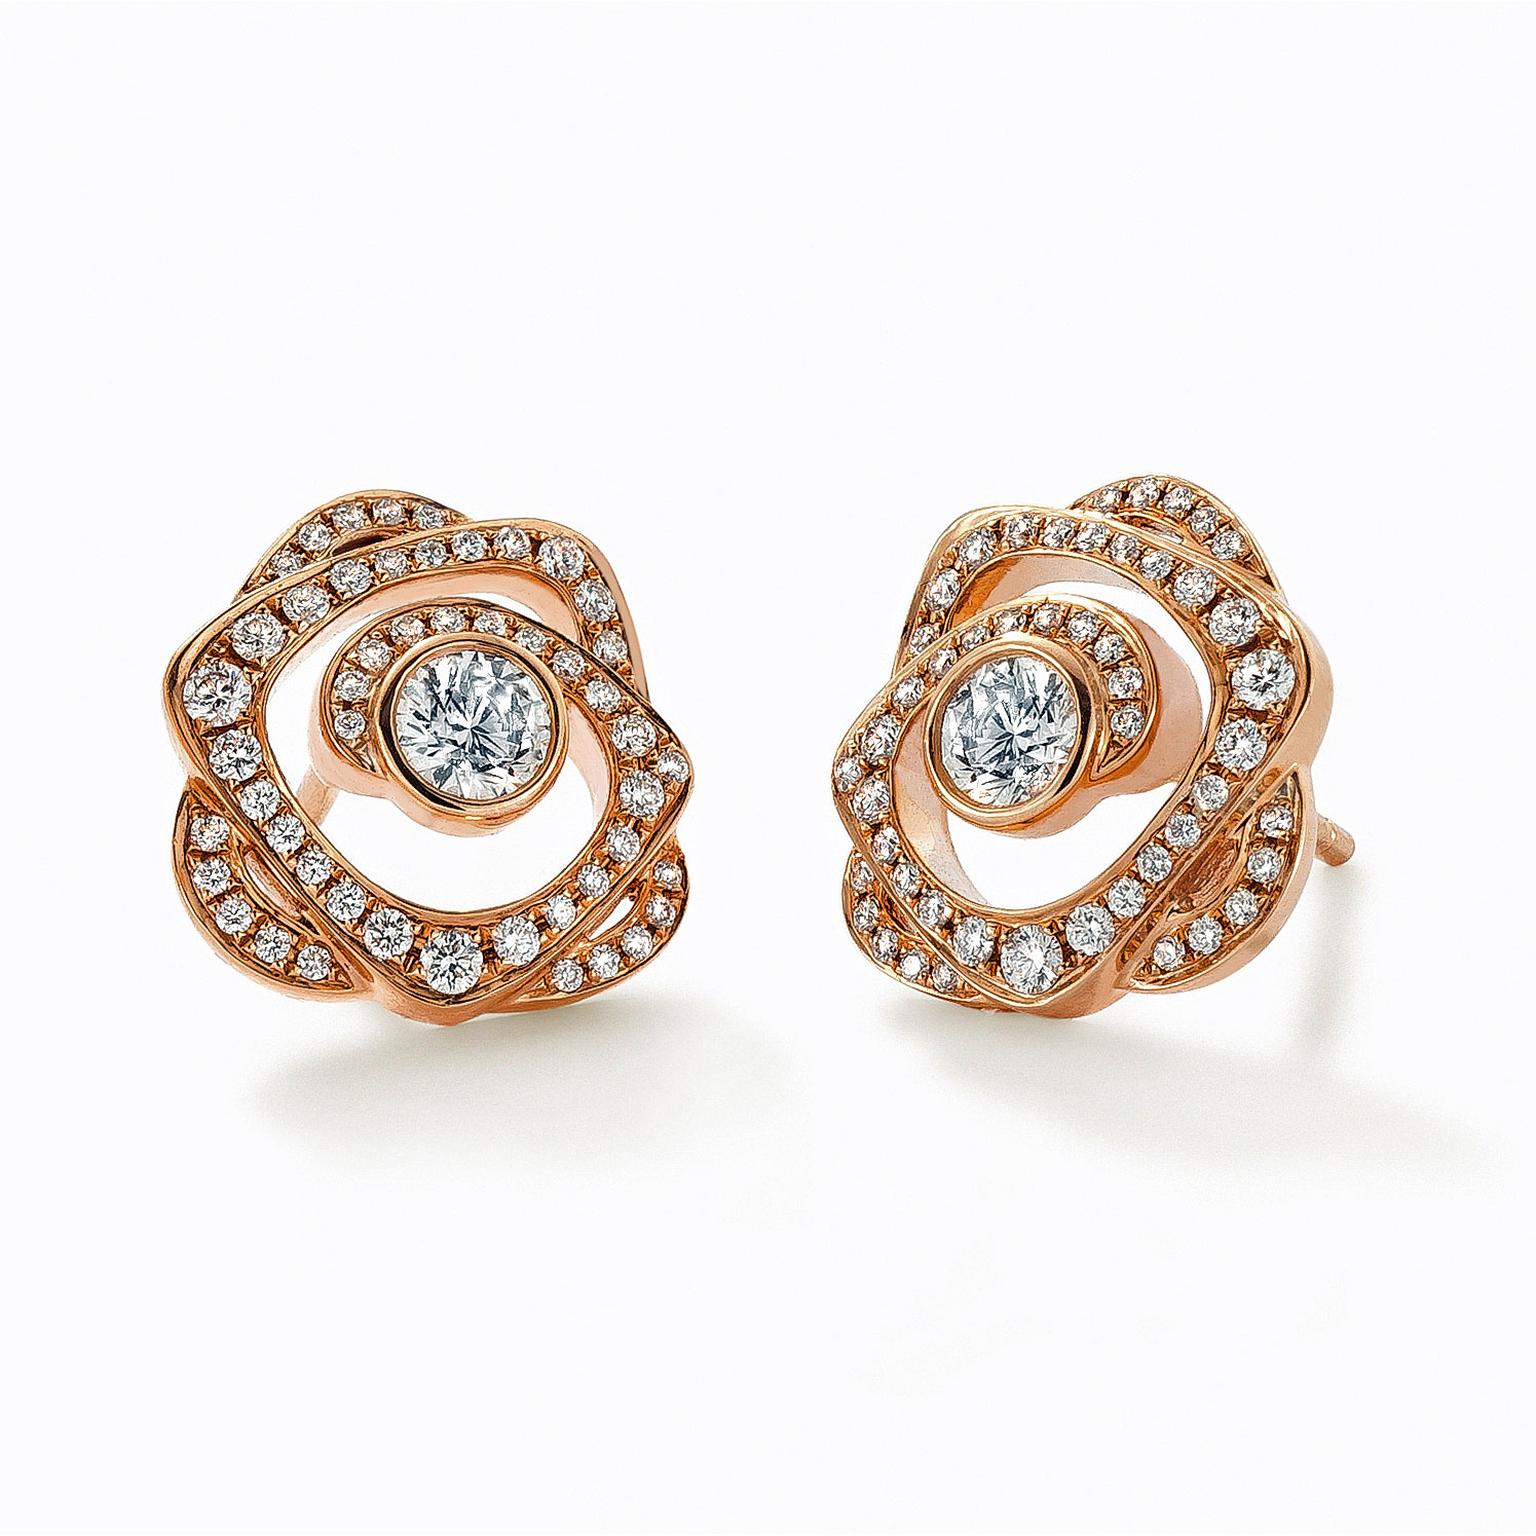 Boodles gold and diamond earrings